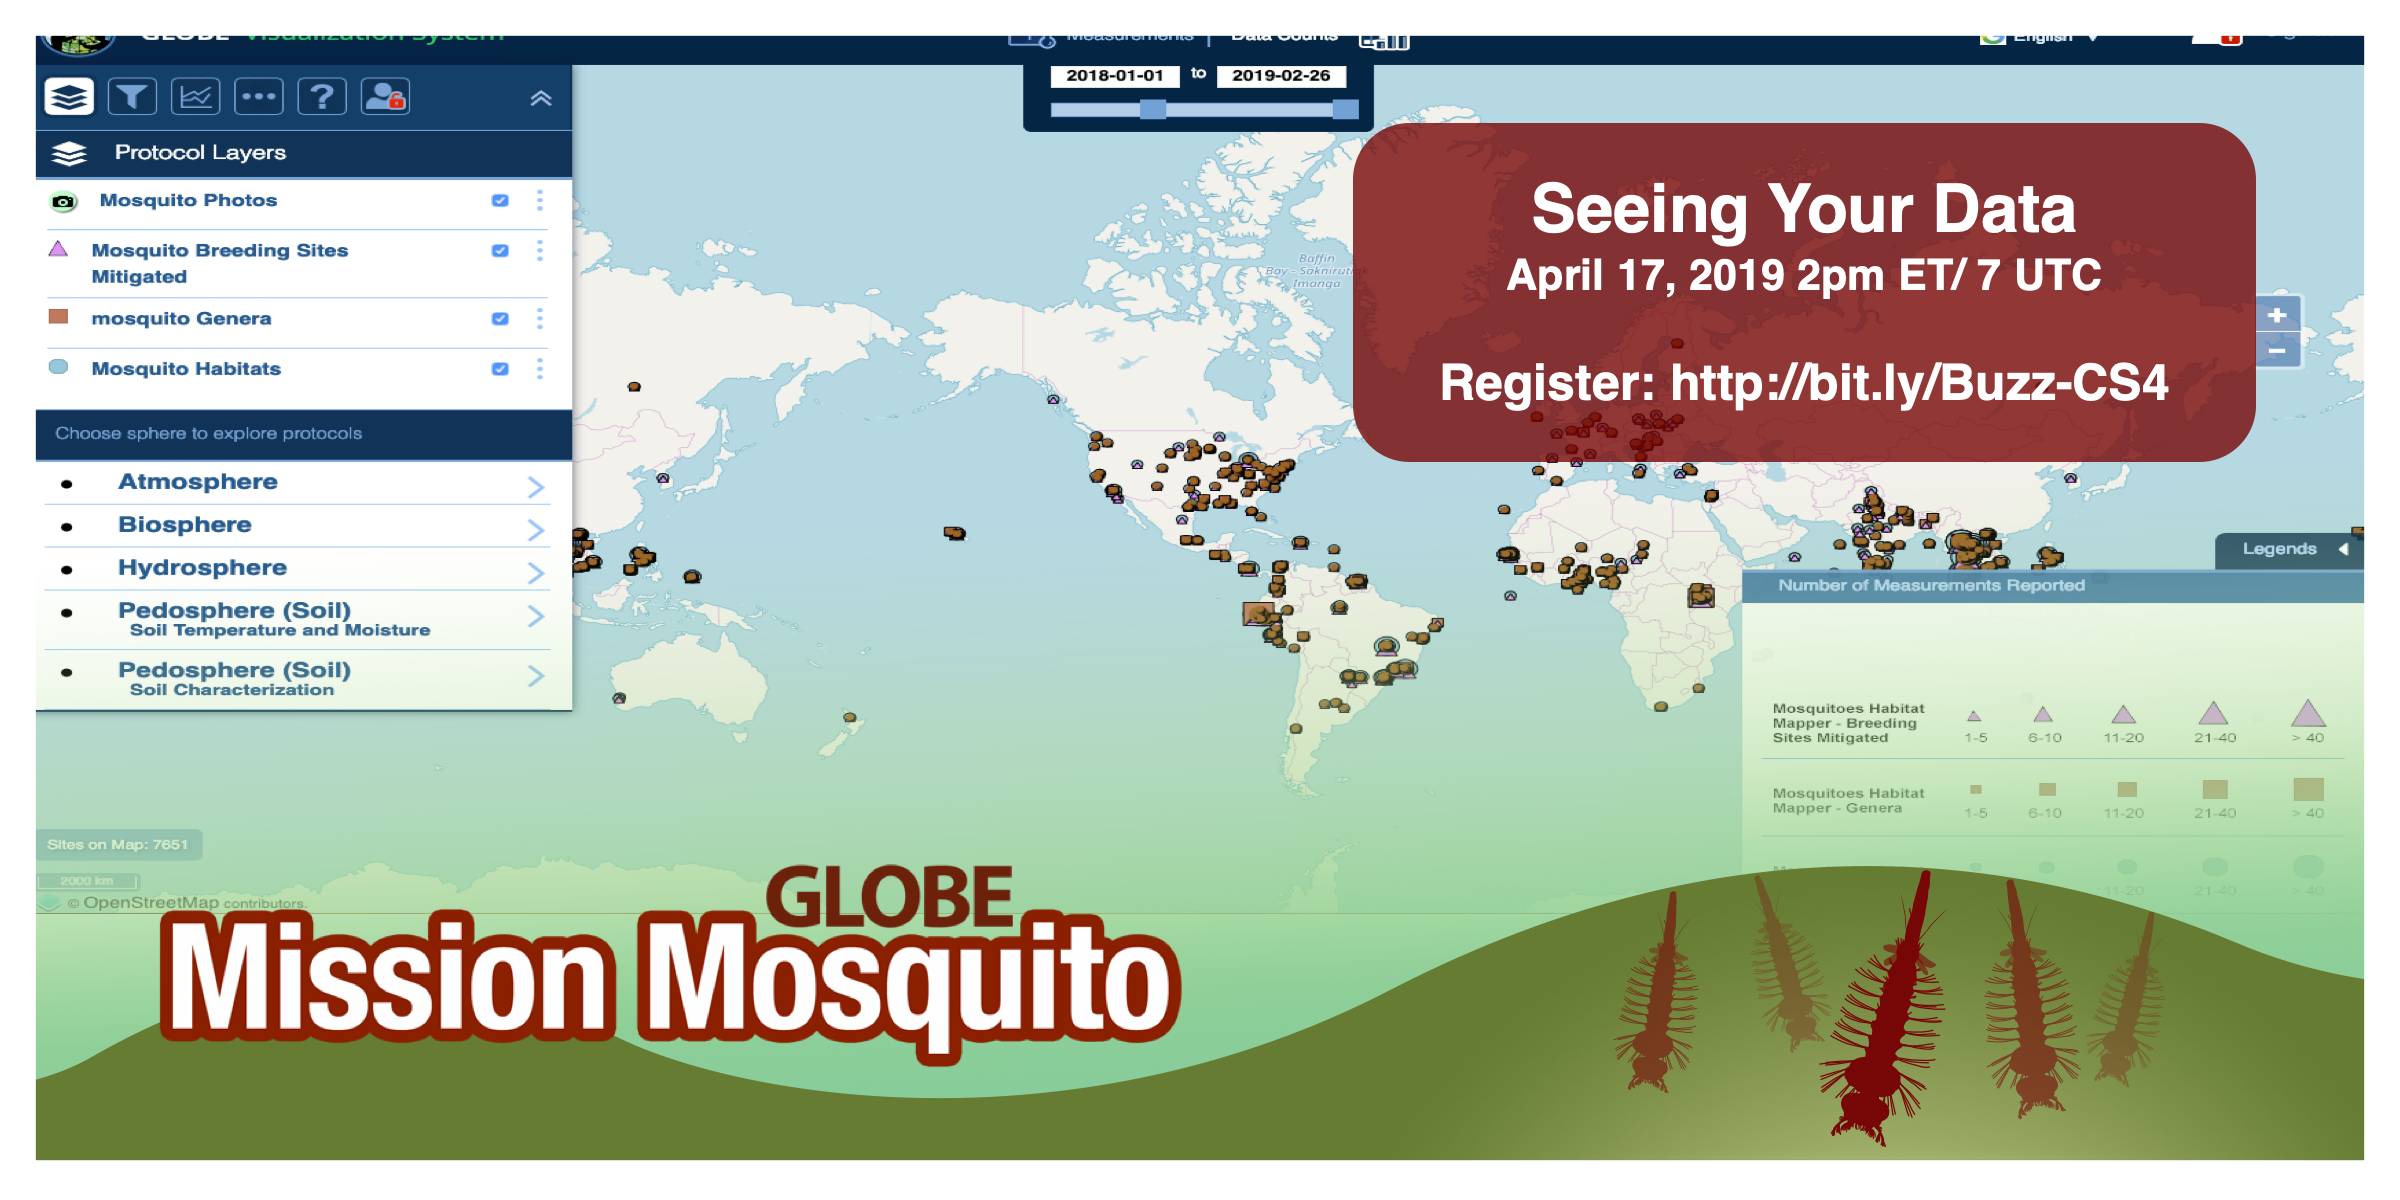 GLOBE Mission Mosquito webinar graphic, with time/date of webinar